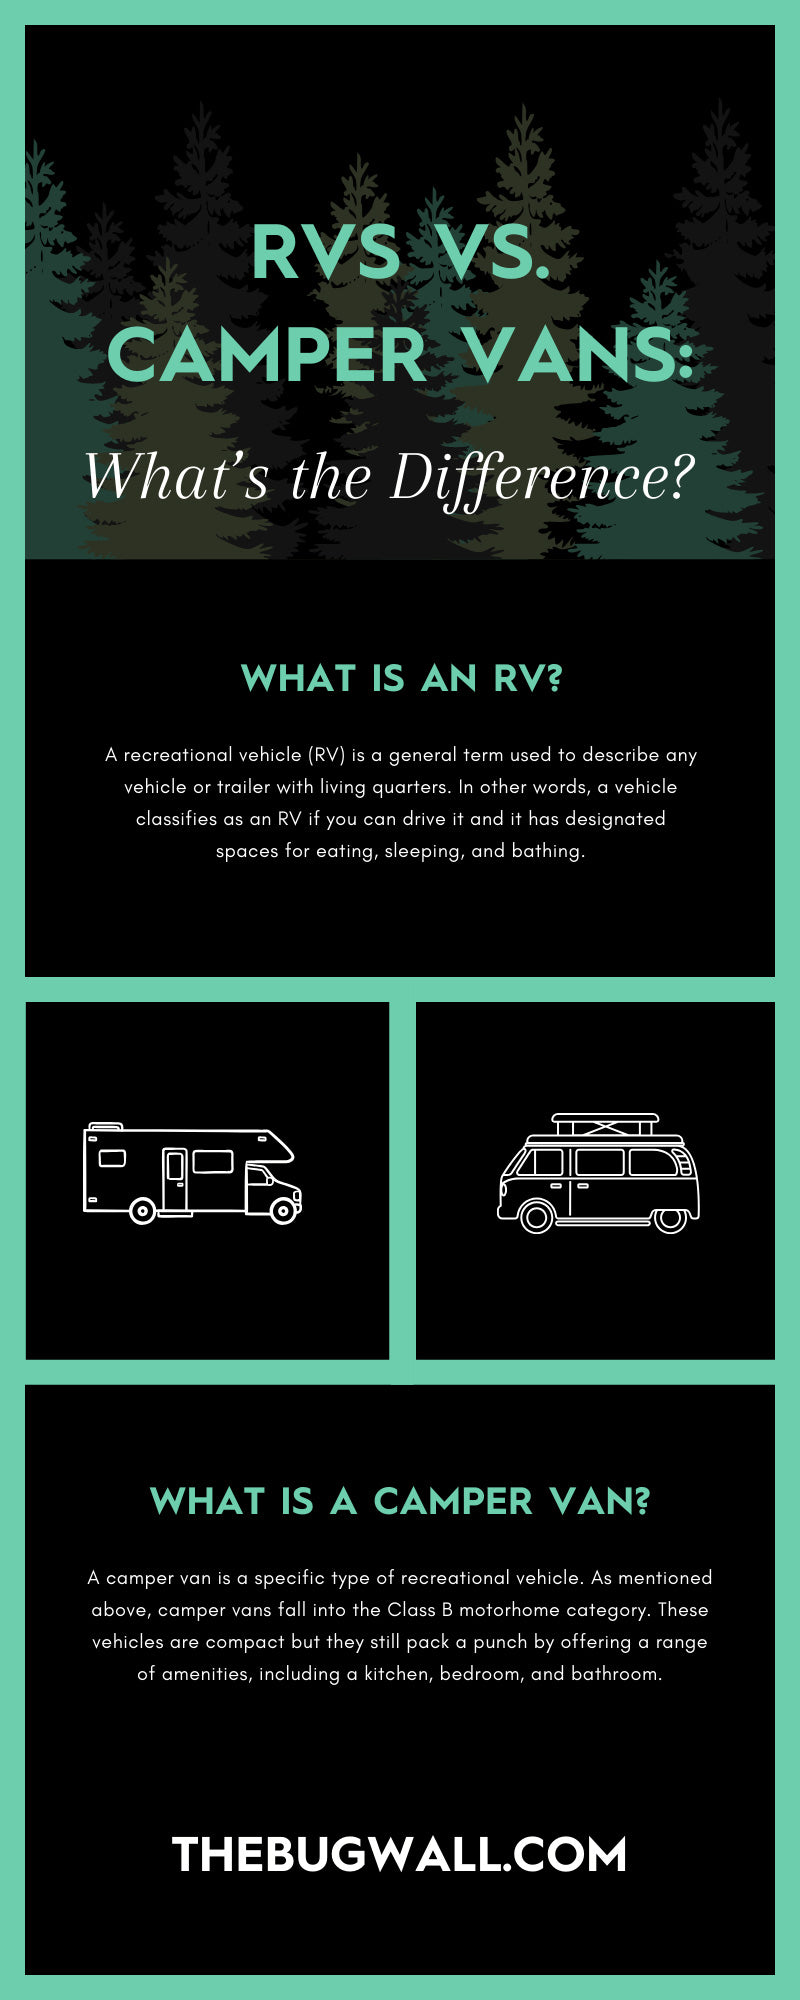 RVs vs. Camper Vans: What’s the Difference?